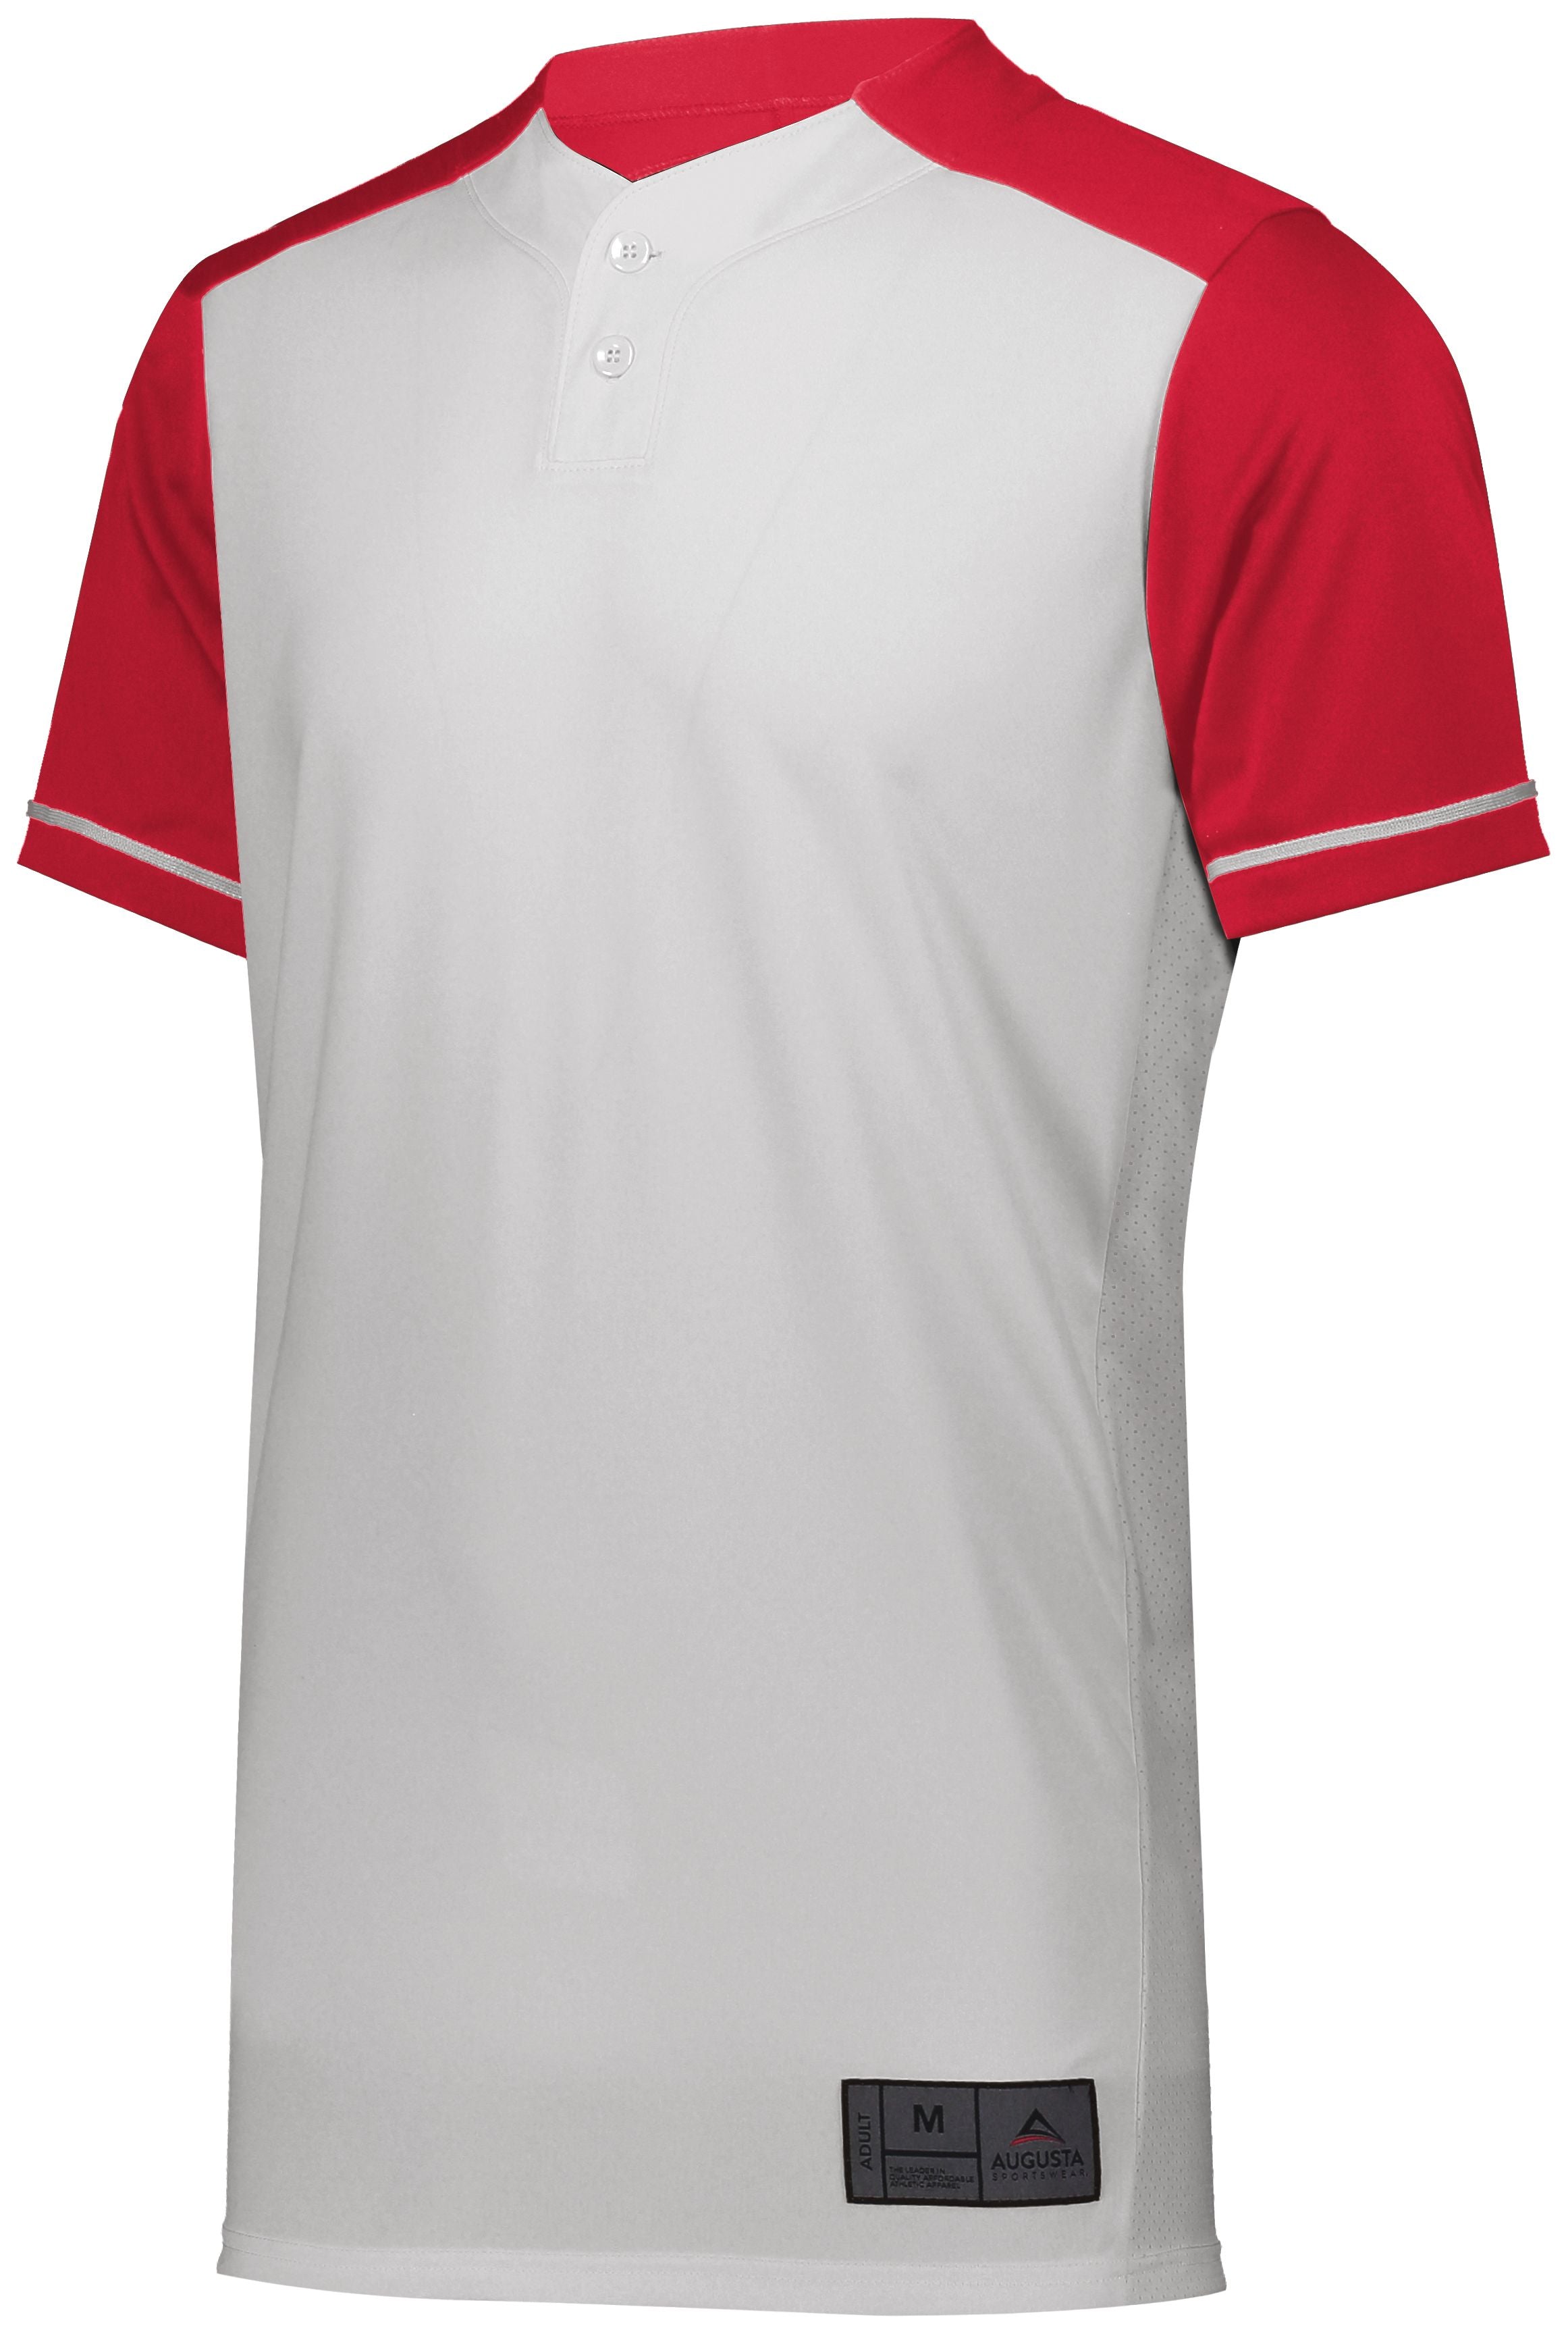 Augusta Sportswear Youth Closer Jersey in White/Scarlet  -Part of the Youth, Youth-Jersey, Augusta-Products, Baseball, Shirts, All-Sports, All-Sports-1 product lines at KanaleyCreations.com